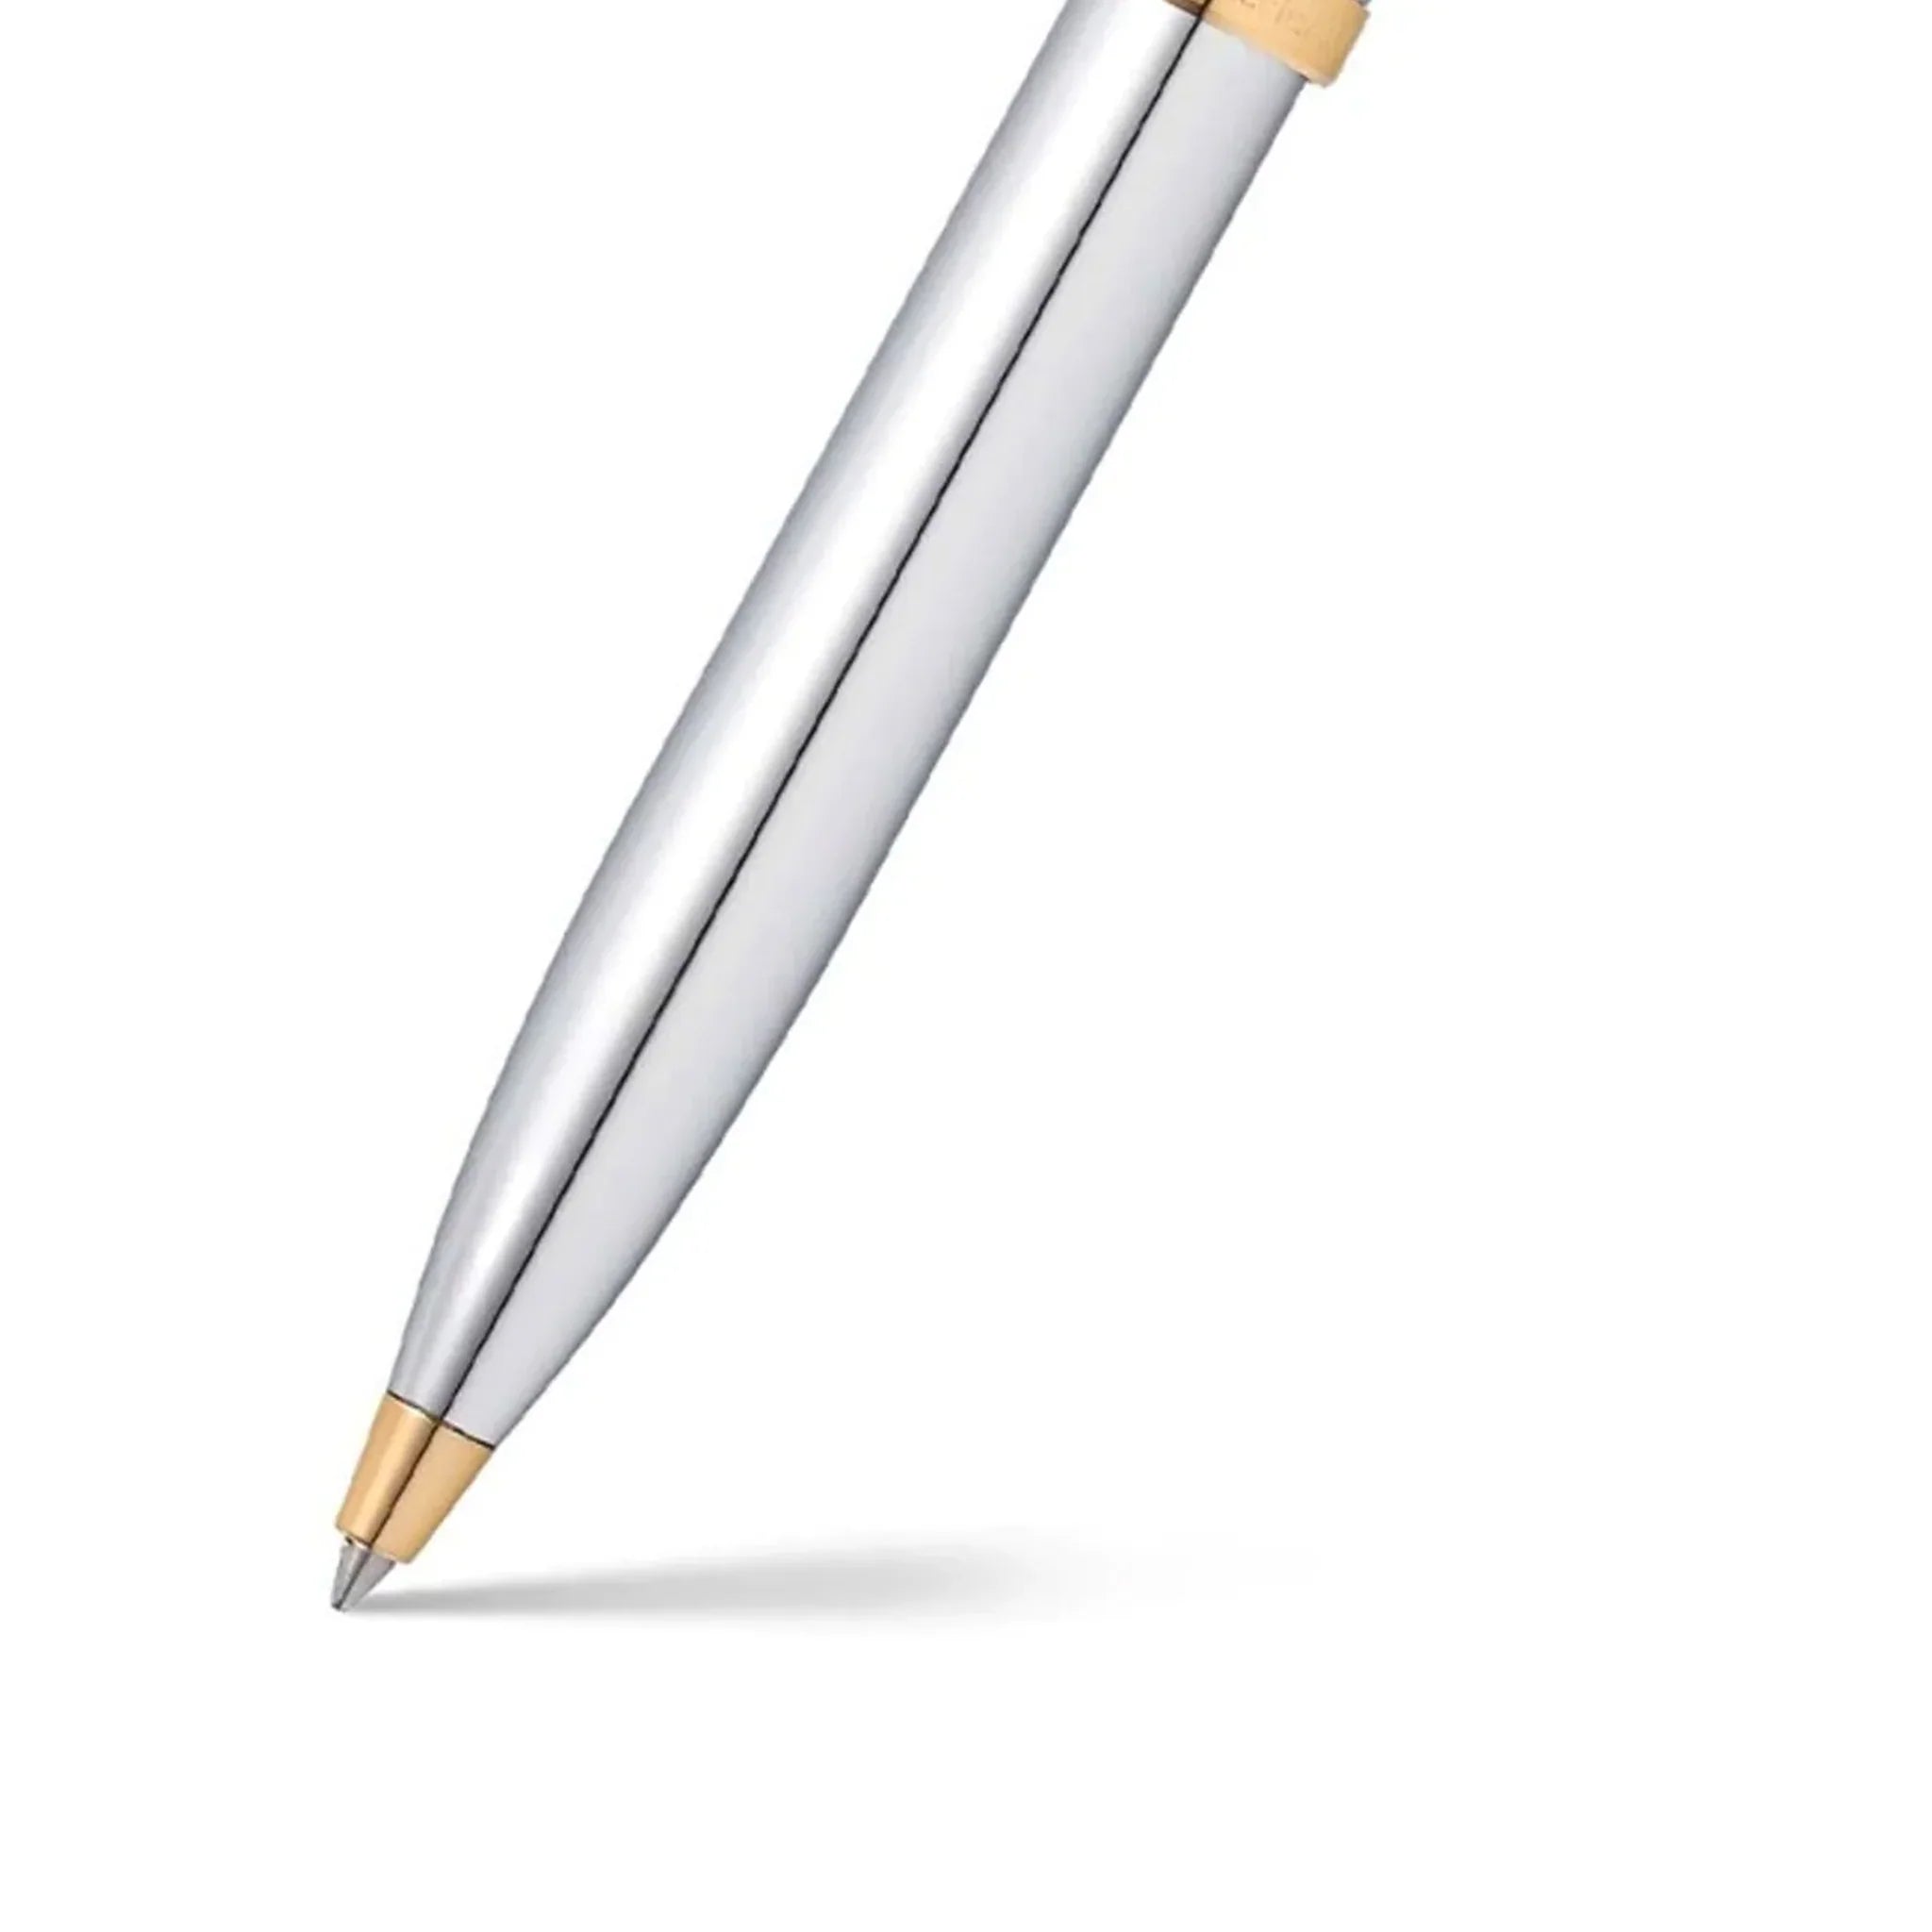 WP33123 -PEN SHEAFFER 300 G9342 BRIGHT CHROME WITH GOLD TONE TRIMS BP WITH GOLD PLATED TABLE CLOCK